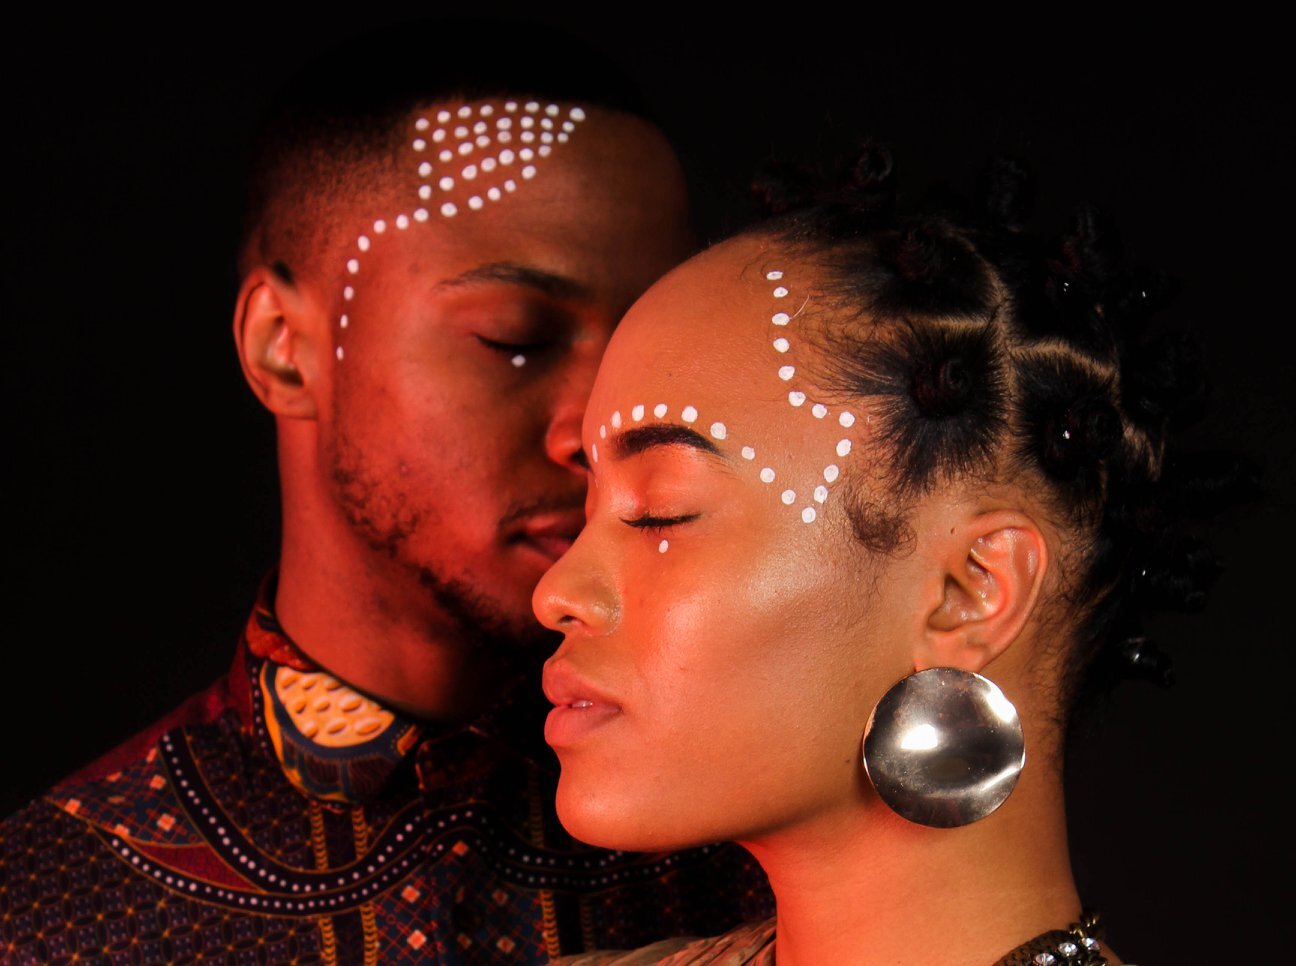 Picture of Nishan Greyson's undergraduate work, shows two black models with dots on their face - eyes are closed. 